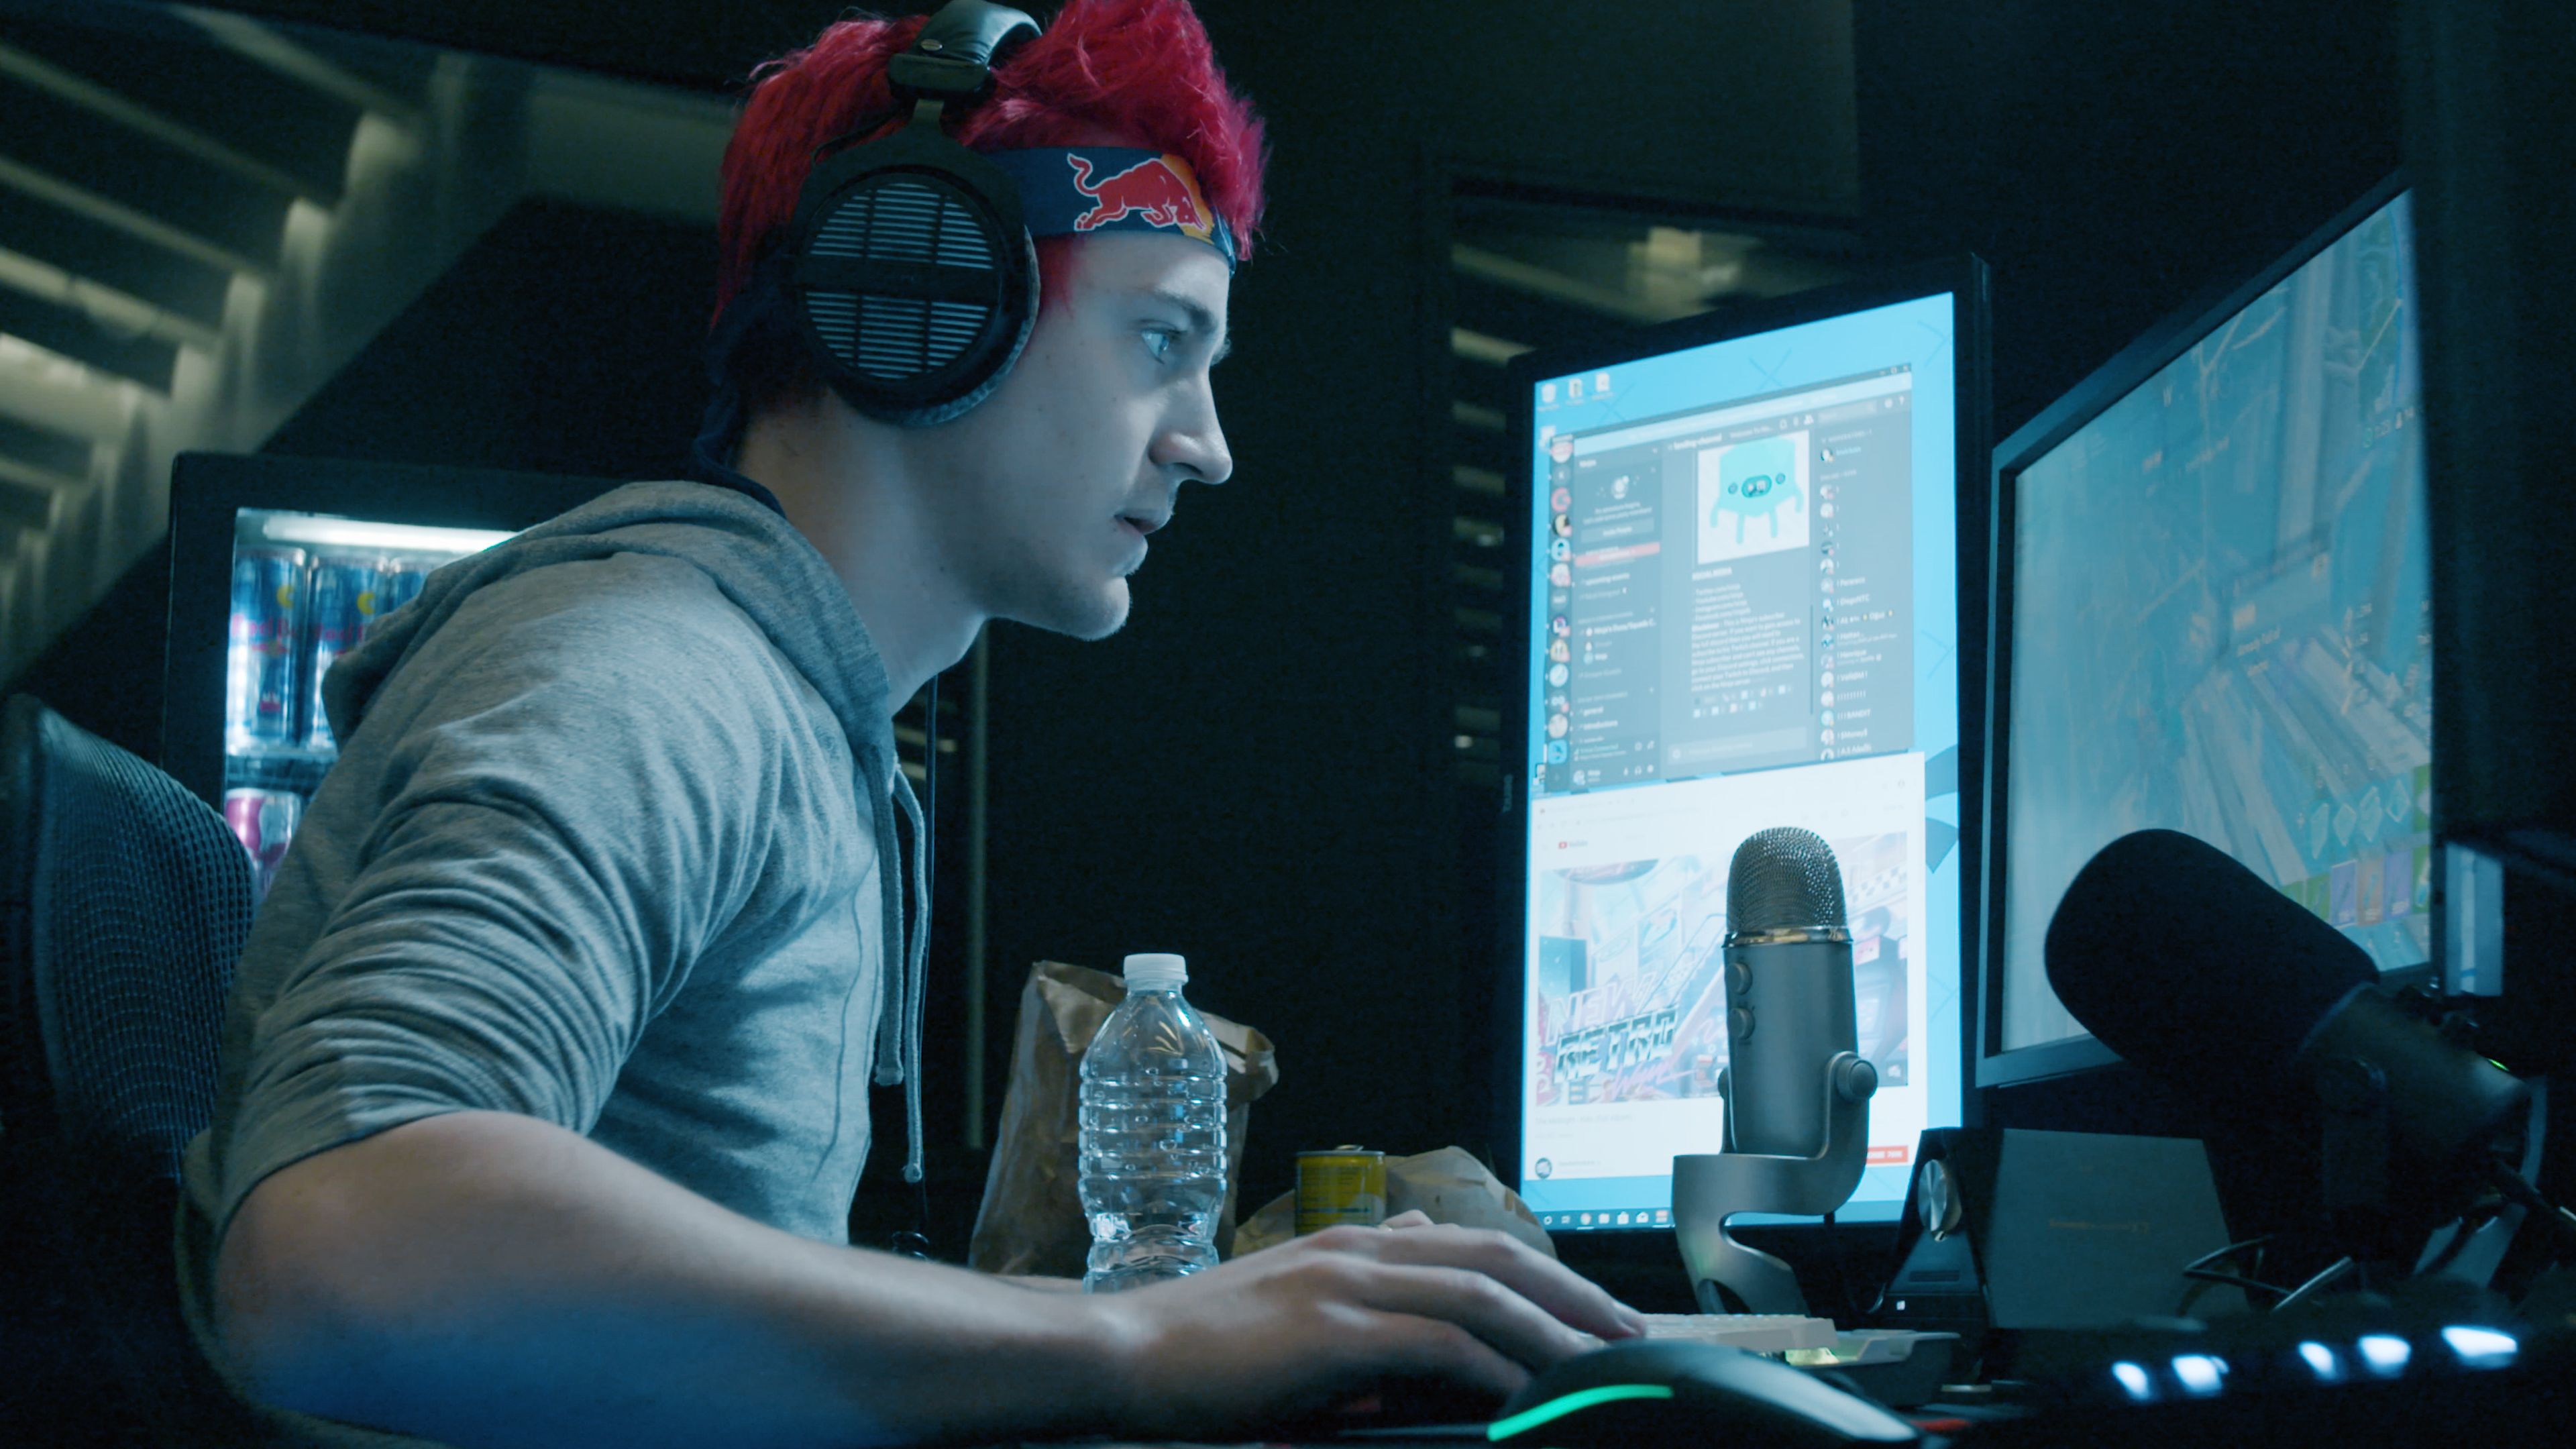 Professional gamers like Ninja use this music game to practice